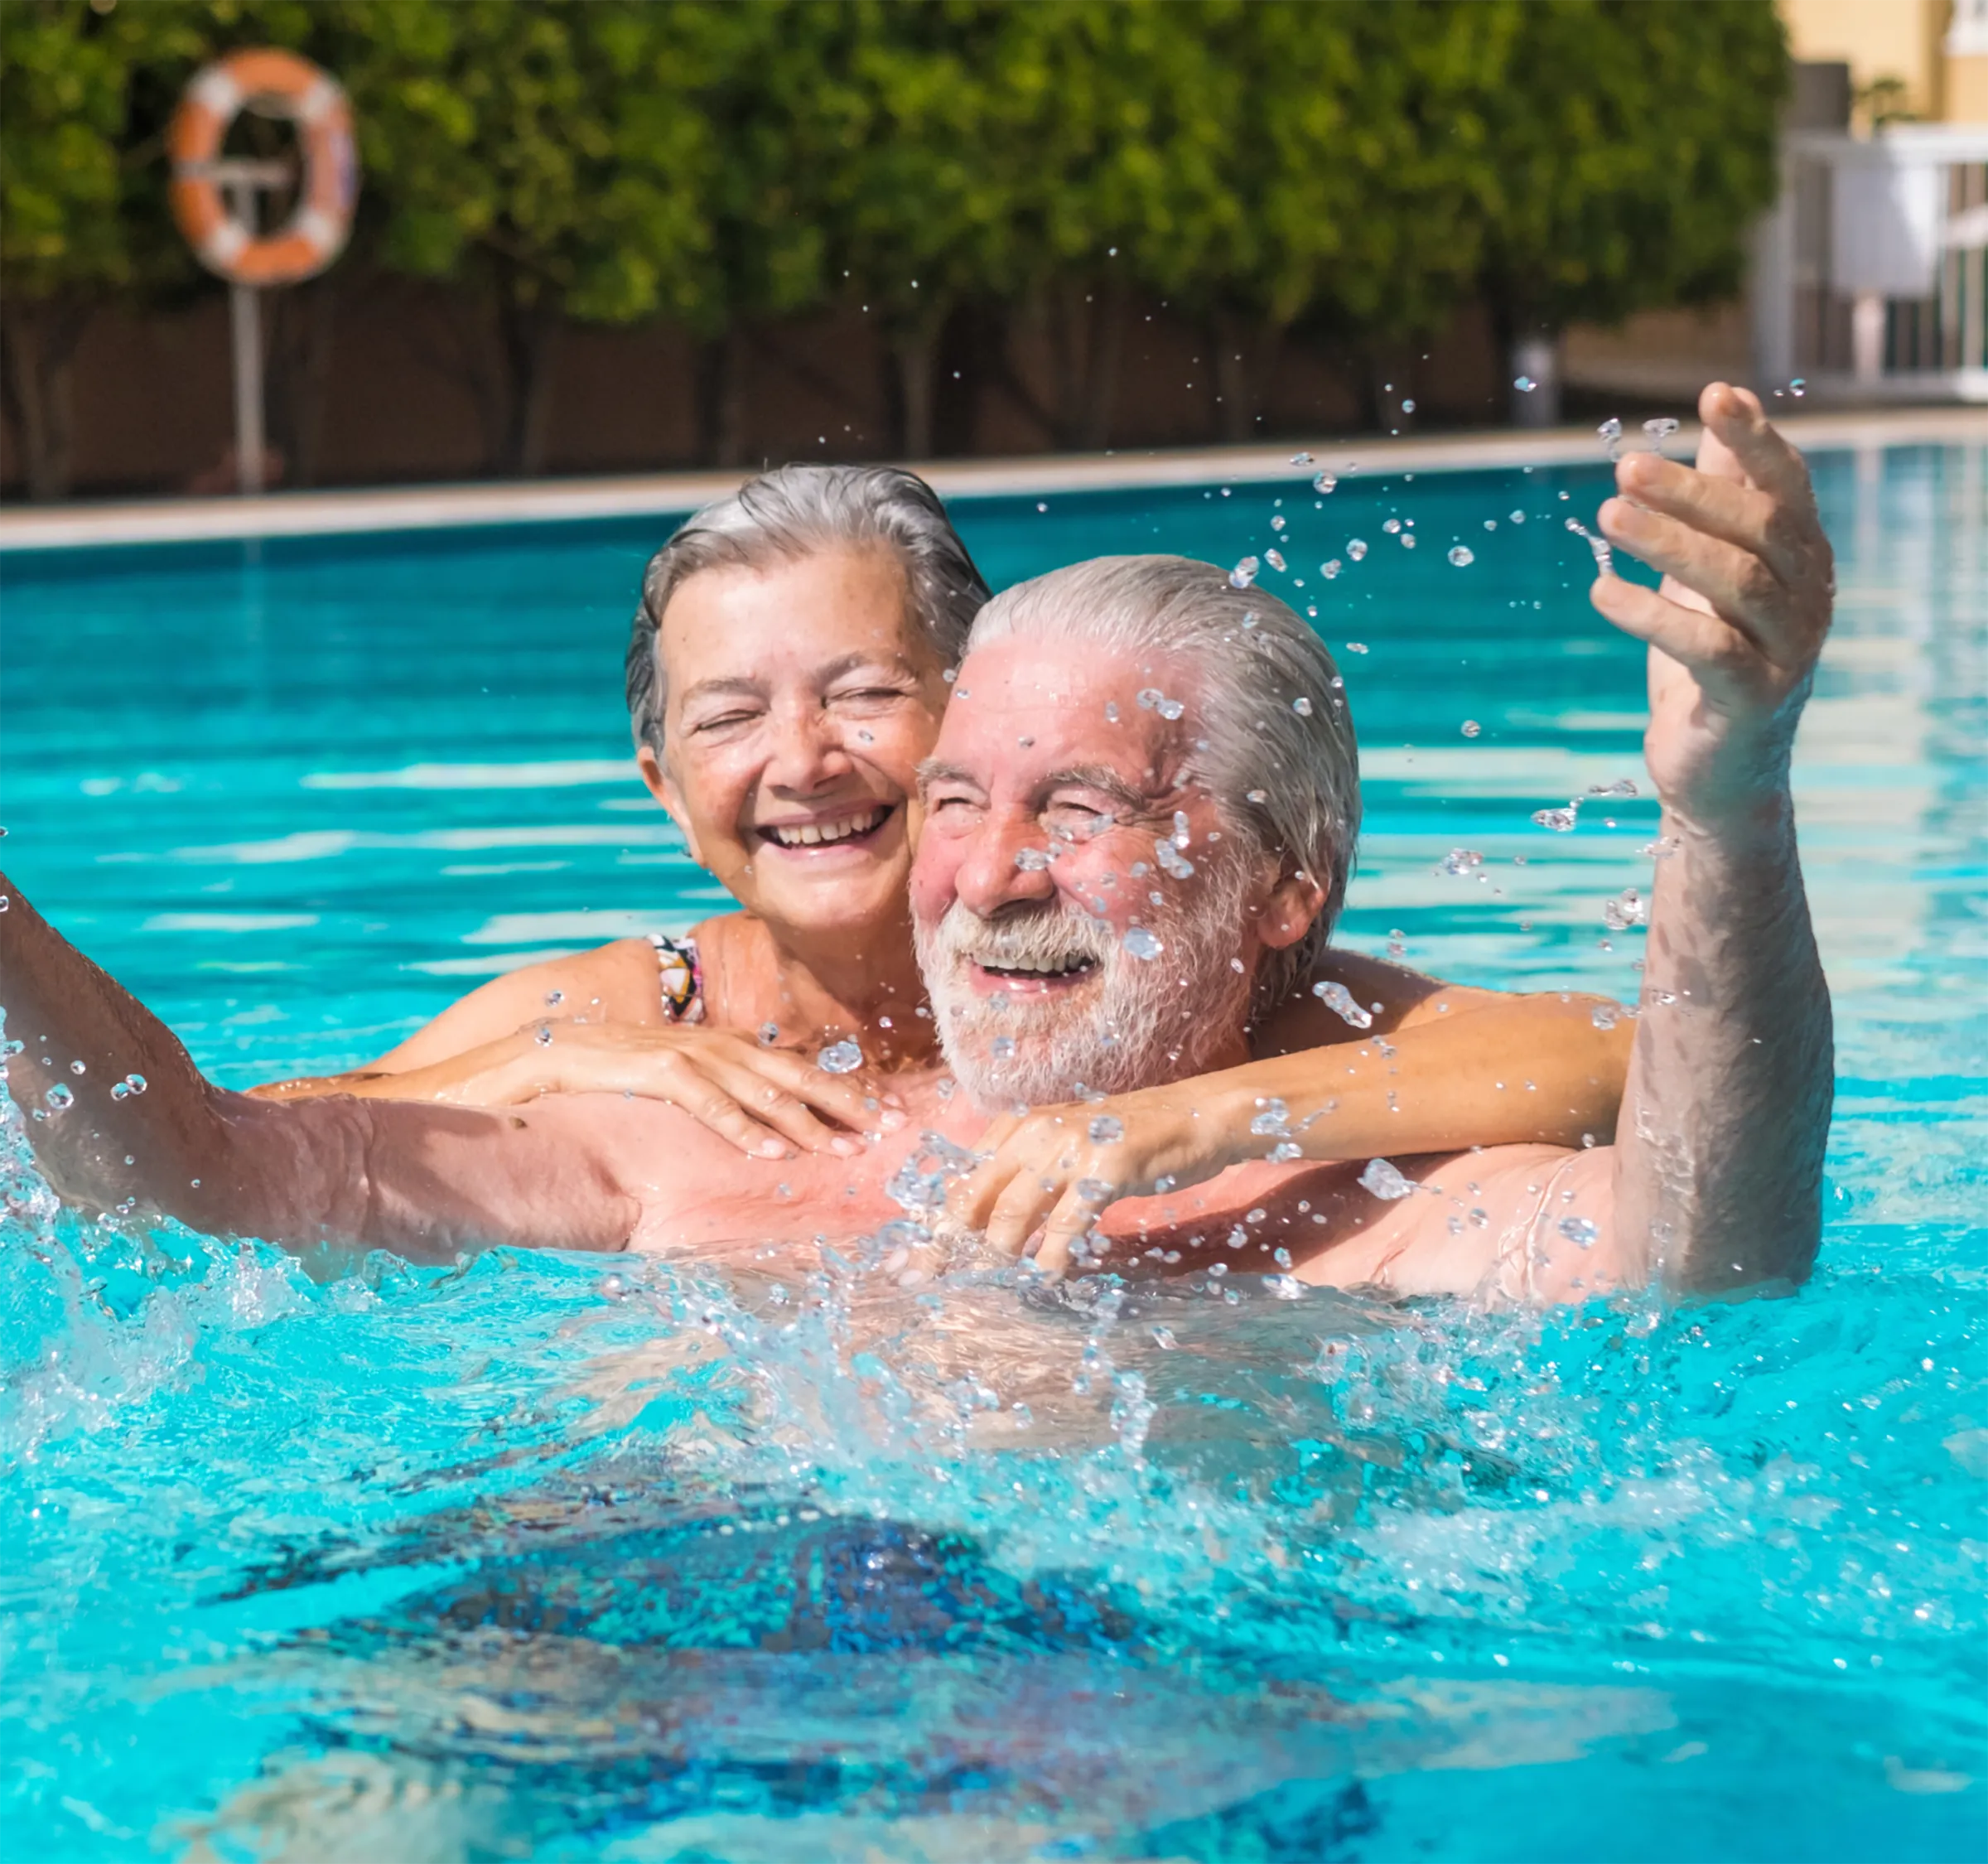 An Independent Living couple smiling and hugging while swimming in a pool.